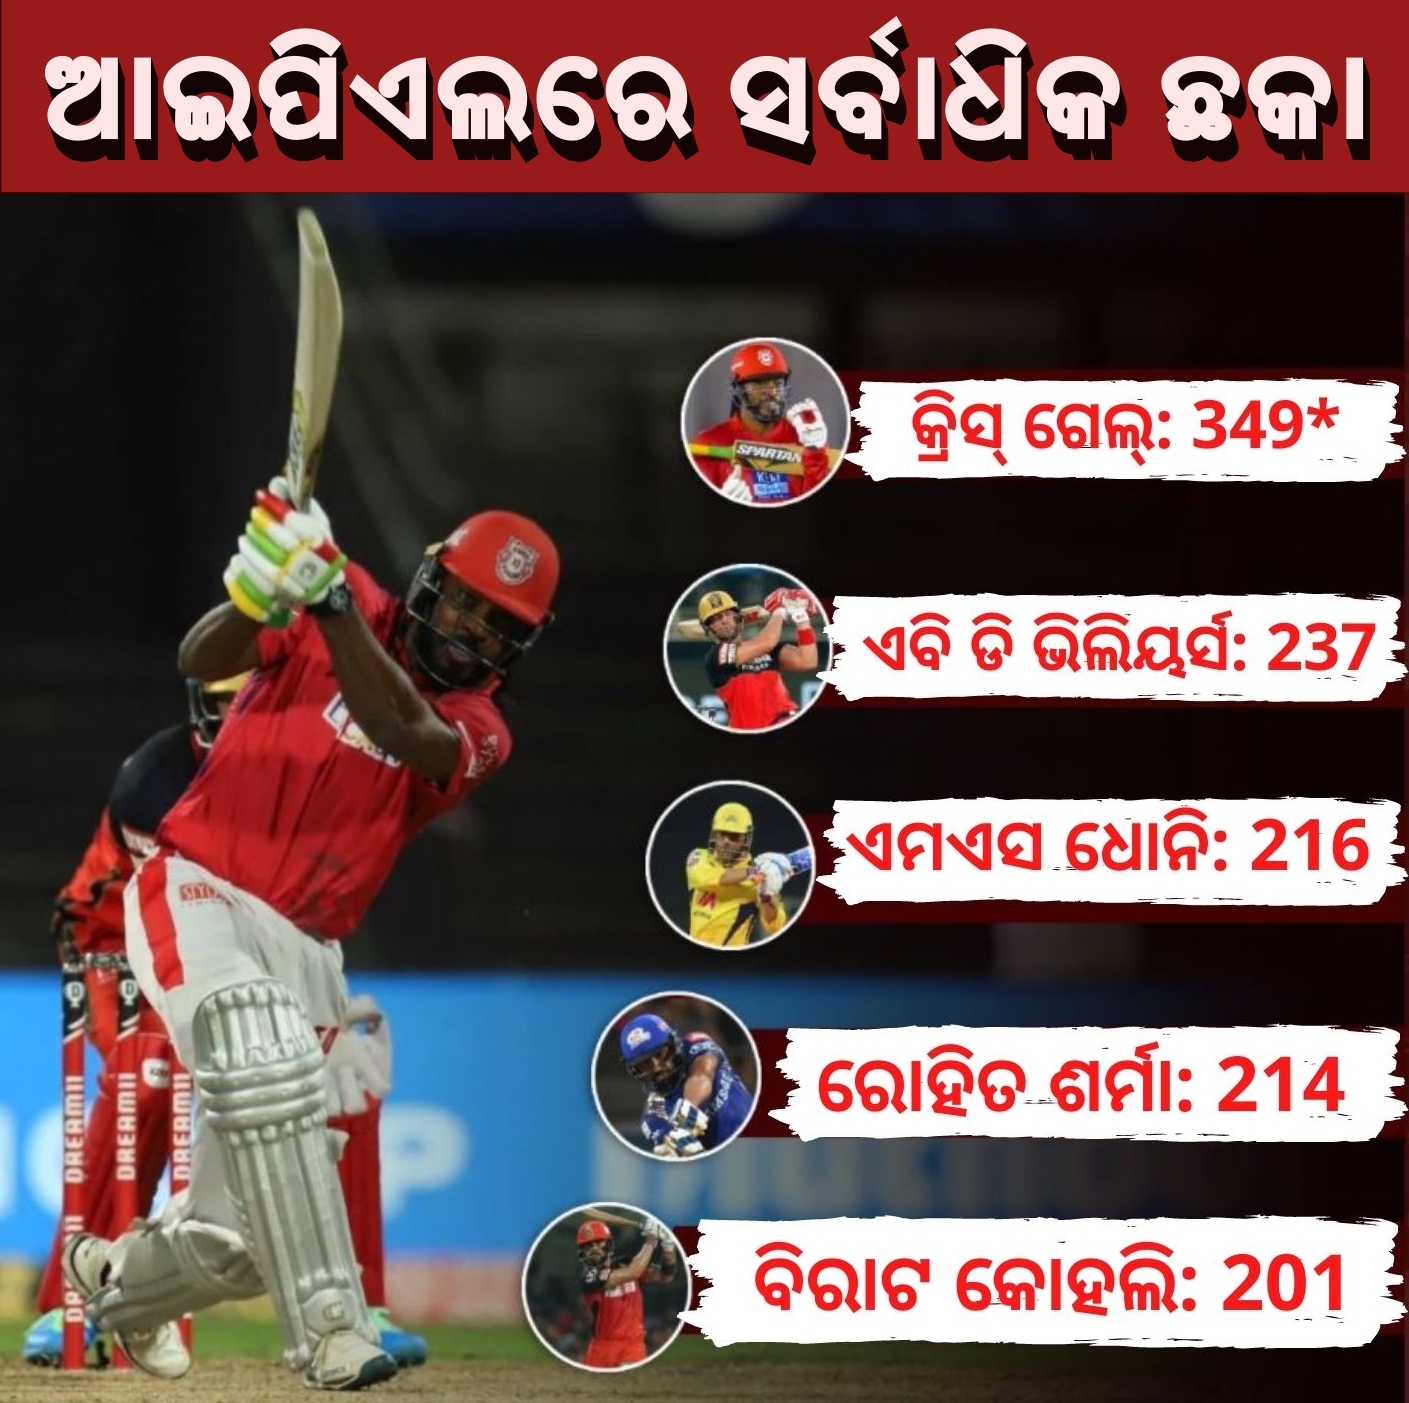 Chris Gayle needs to hit one more six to become the first batsman to hit 350 sixes in IPL